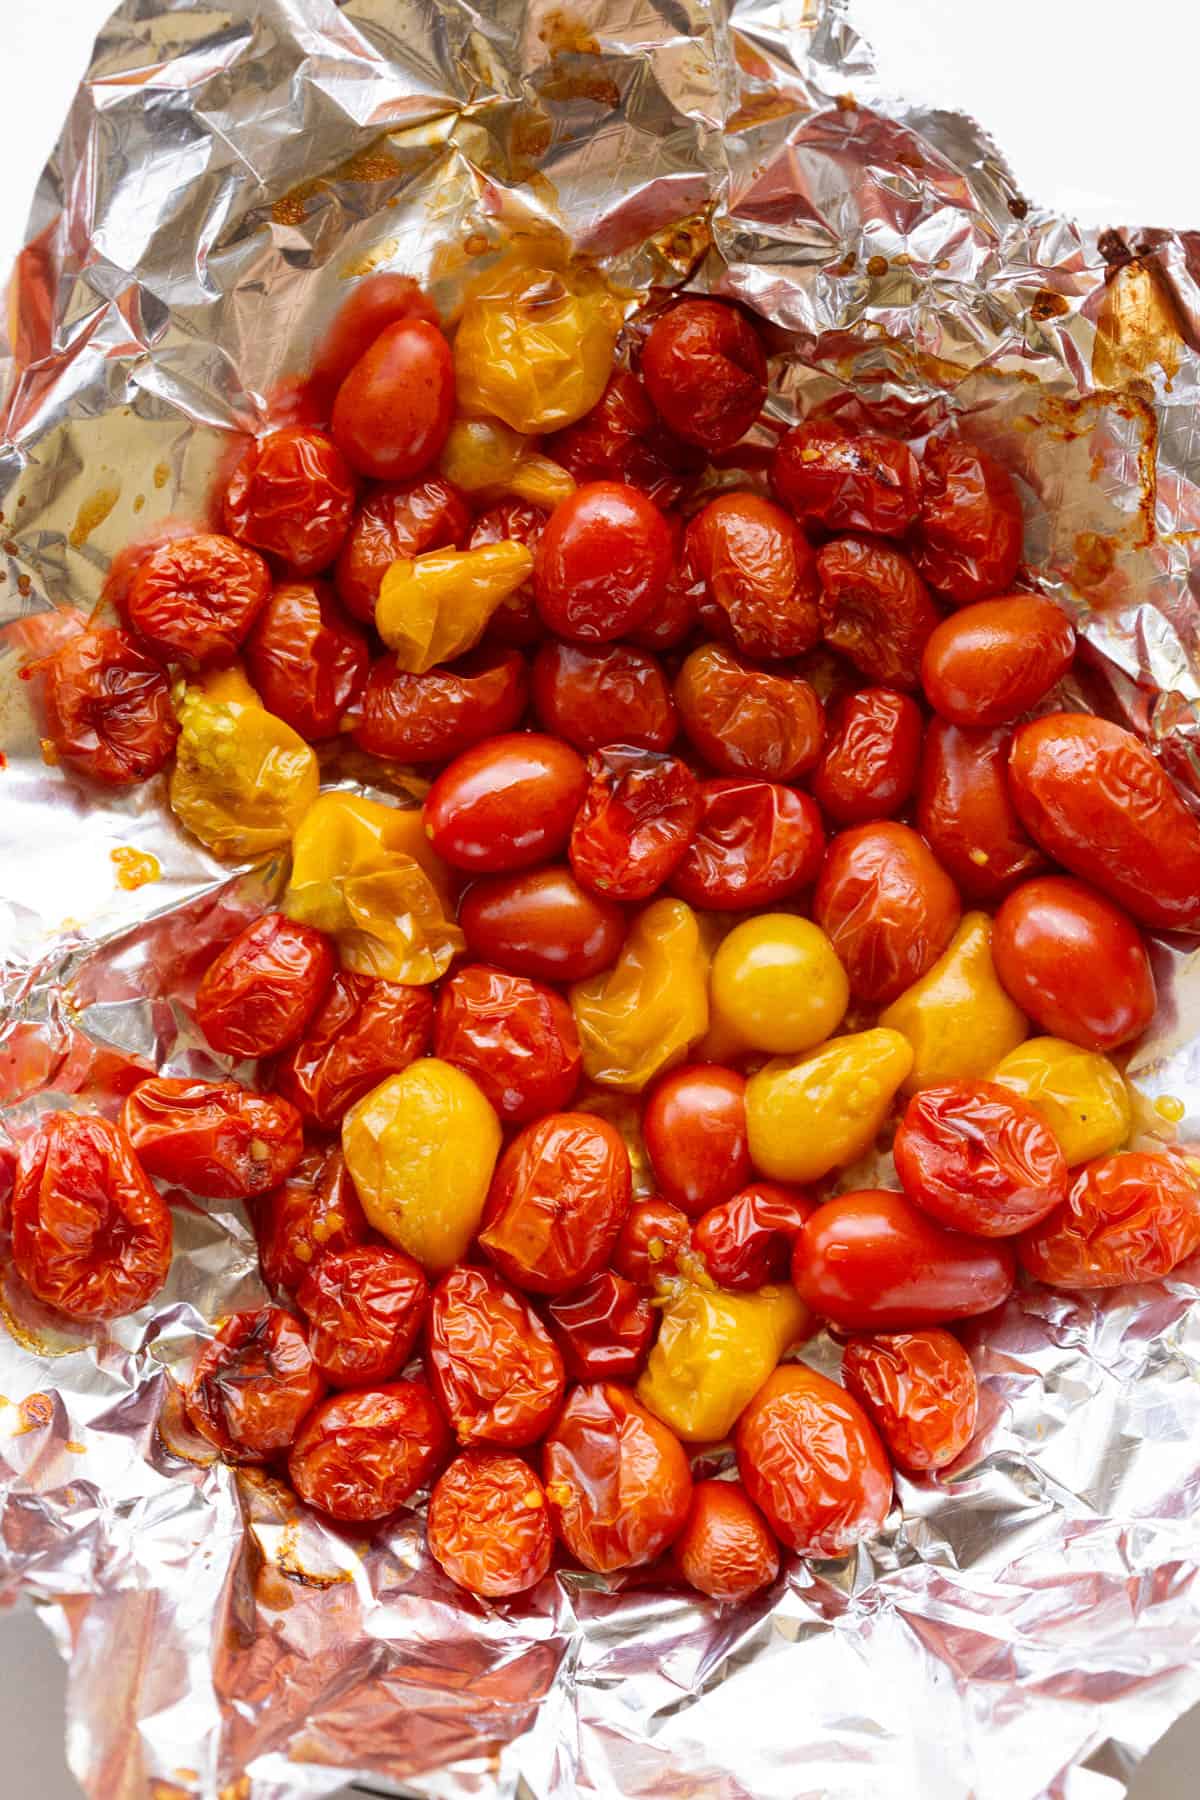 A sheet of aluminium foil layered with yellow and red roasted cherry tomatoes.